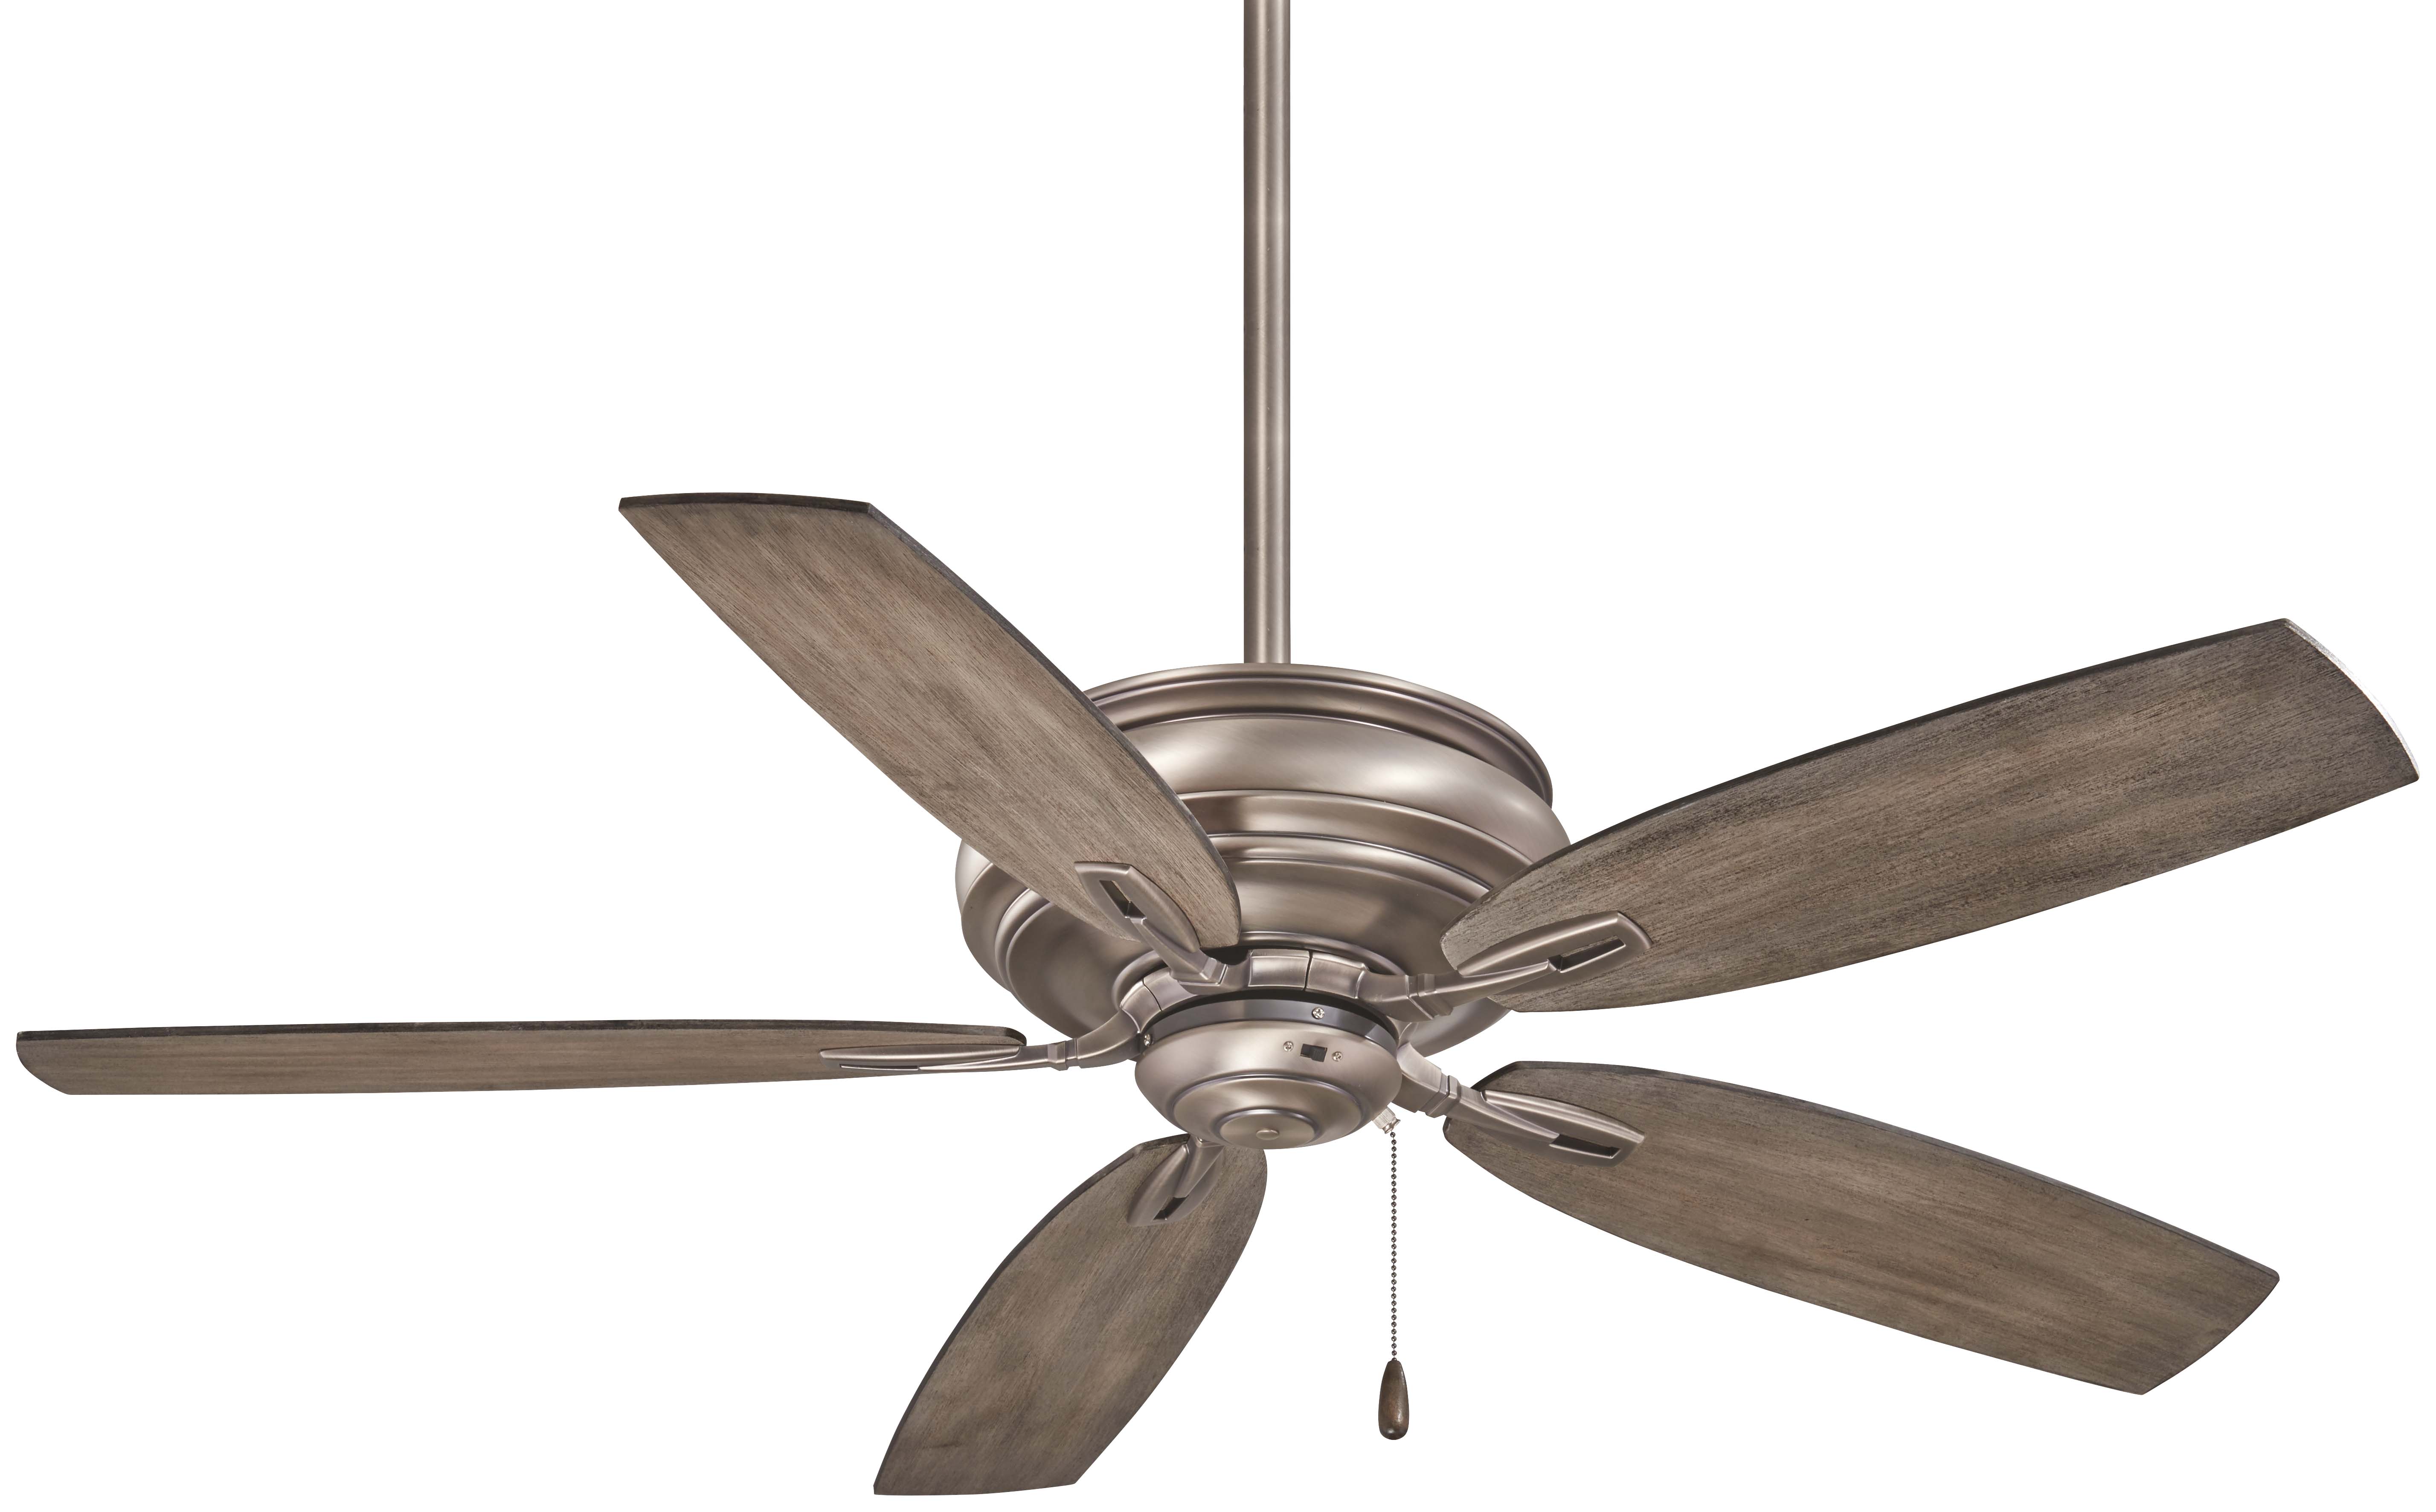 Minkaaire F614 Fb French Beige Timeless 54 5 Blade Energy Star